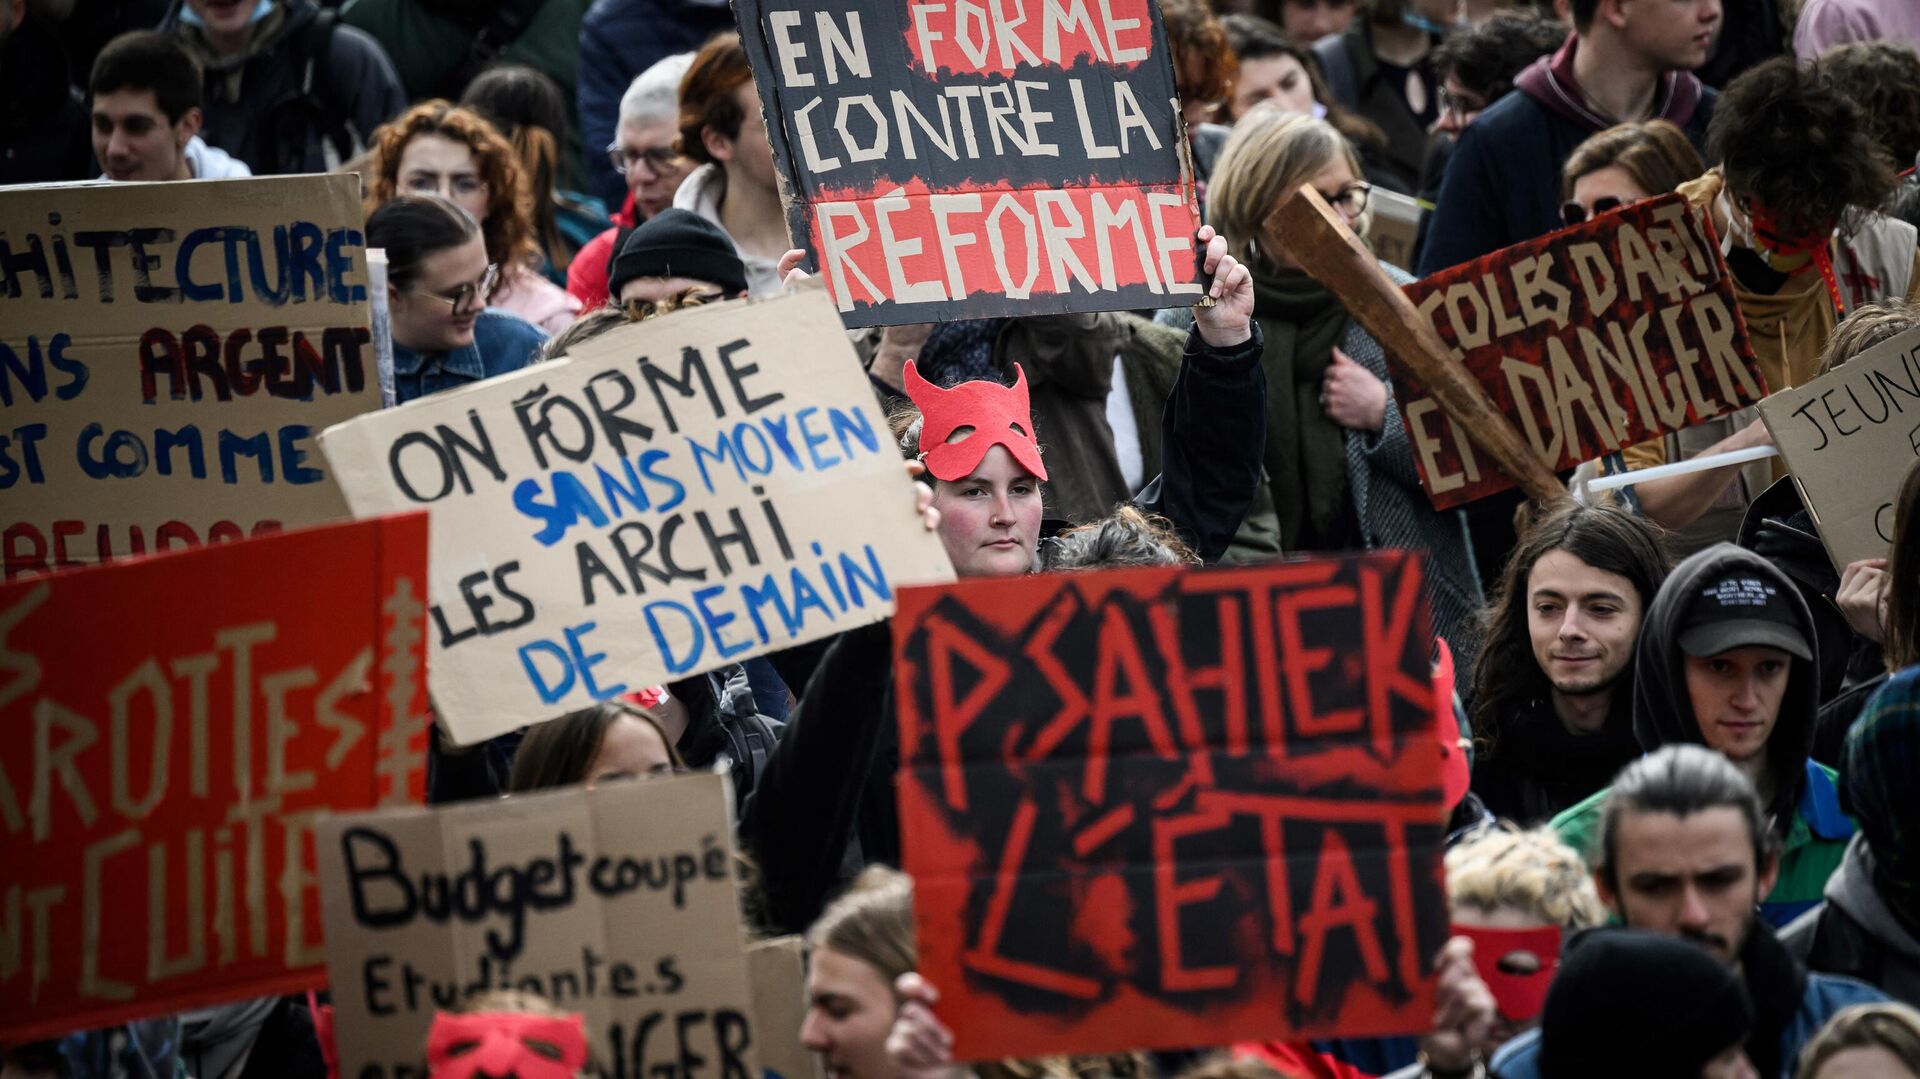 Protestors hold placards during a  demonstration as part of a national day of strikes and protests, a week after the French government pushed a pensions reform through parliament without a vote, using the article 49.3 of the constitution, in Nantes, western France, on March 23, 2023 - Sputnik International, 1920, 28.03.2023